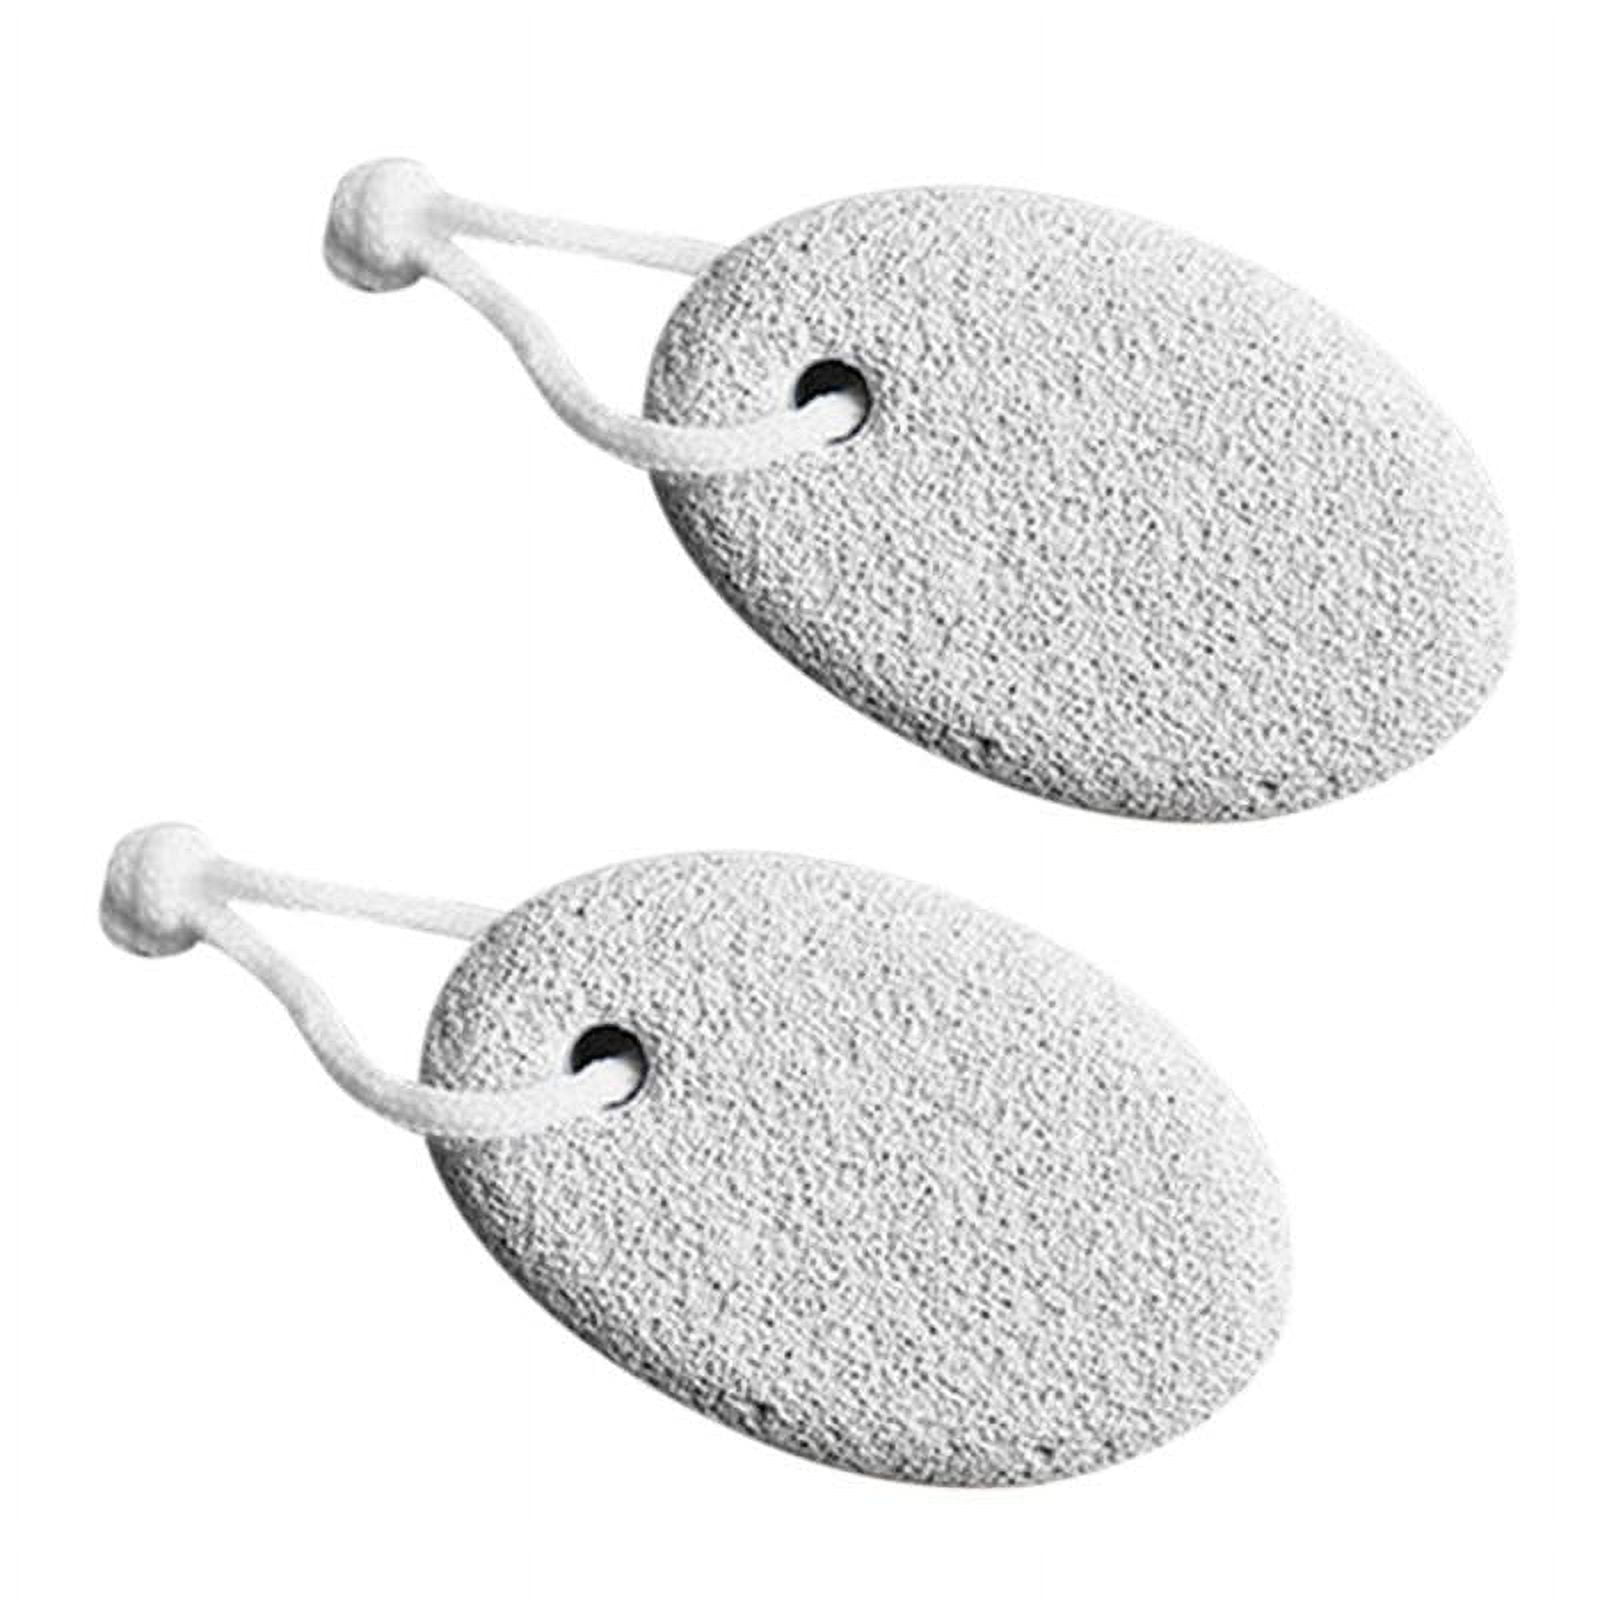 Pumice Stone - Pumice Stone for Feet - Natural Foot Scrubber Stone for  Callus Remover - Natural Vulcan Pumice Stone - Foot exfoliator - Shower Foot  Scrubber - Piedra pomez para pies (Dark Grey)